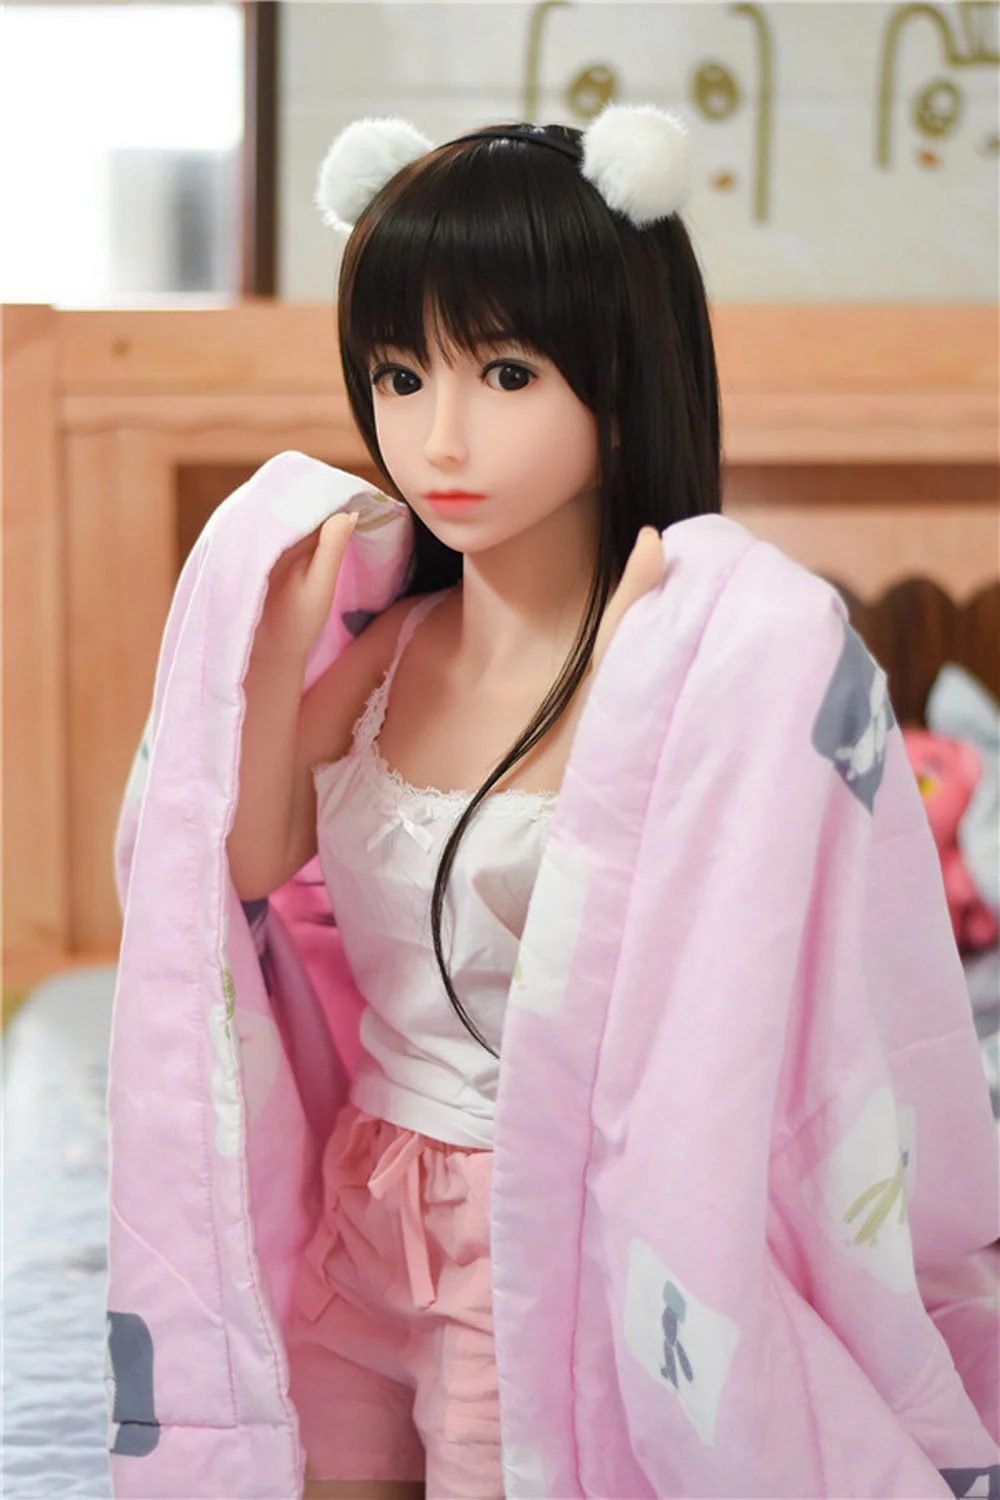 Sex doll with quilt in both hands